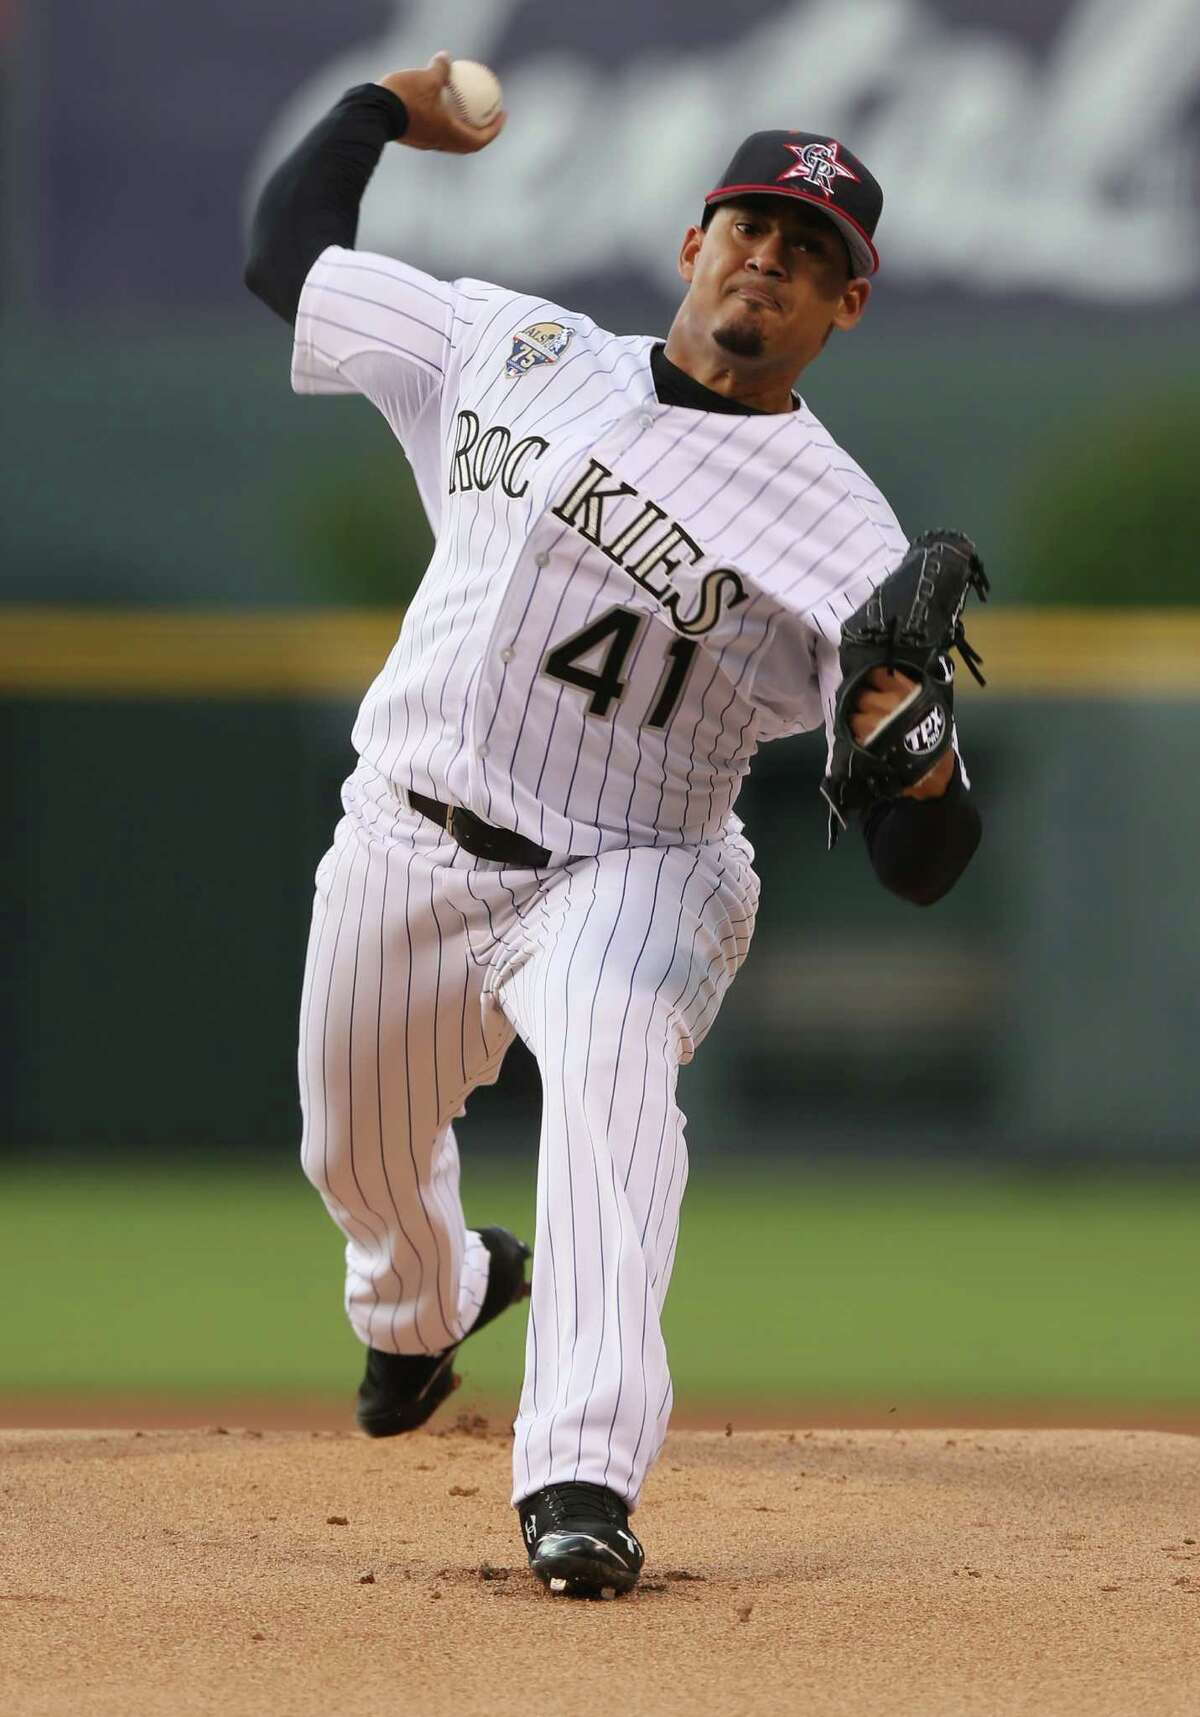 Making his season debut, Colorado Rockies starting pitcher Jair Jurrjens works against the Los Angeles Dodgers in the first inning of a baseball game in Denver, Friday, July 4, 2014. (AP Photo/David Zalubowski)